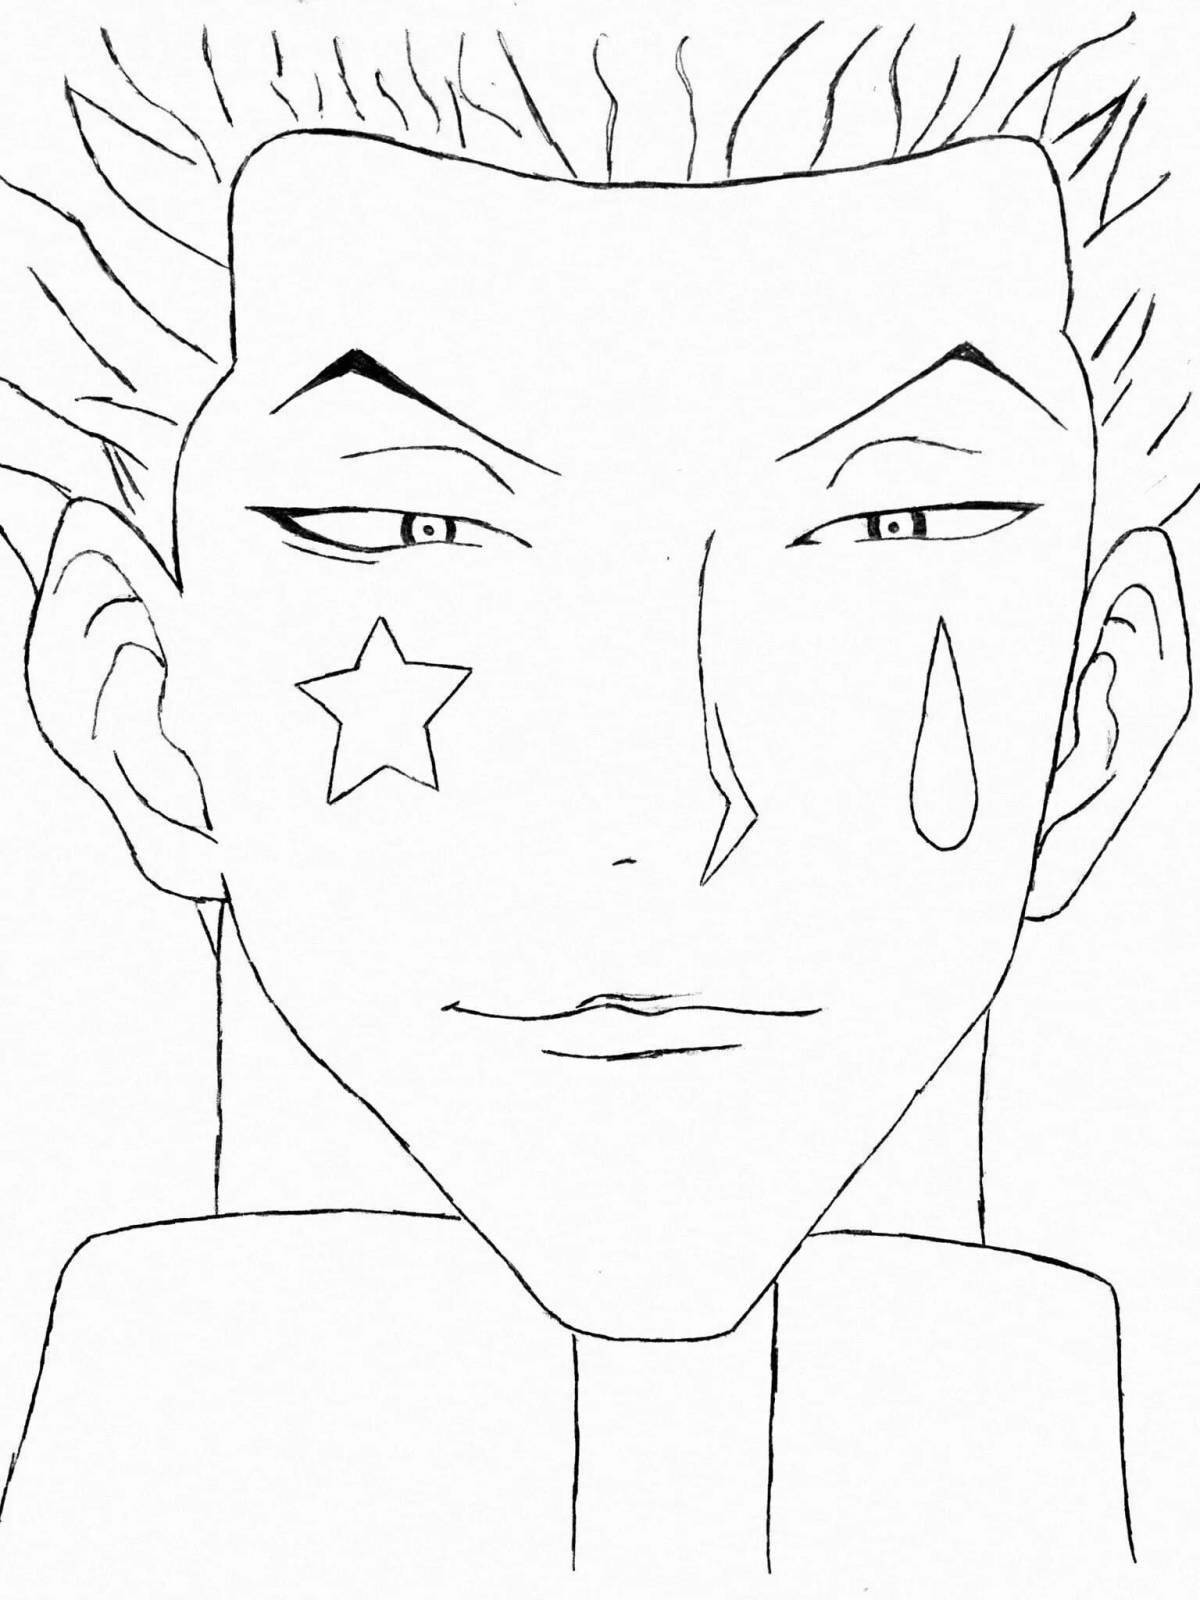 Route's adorable coloring page